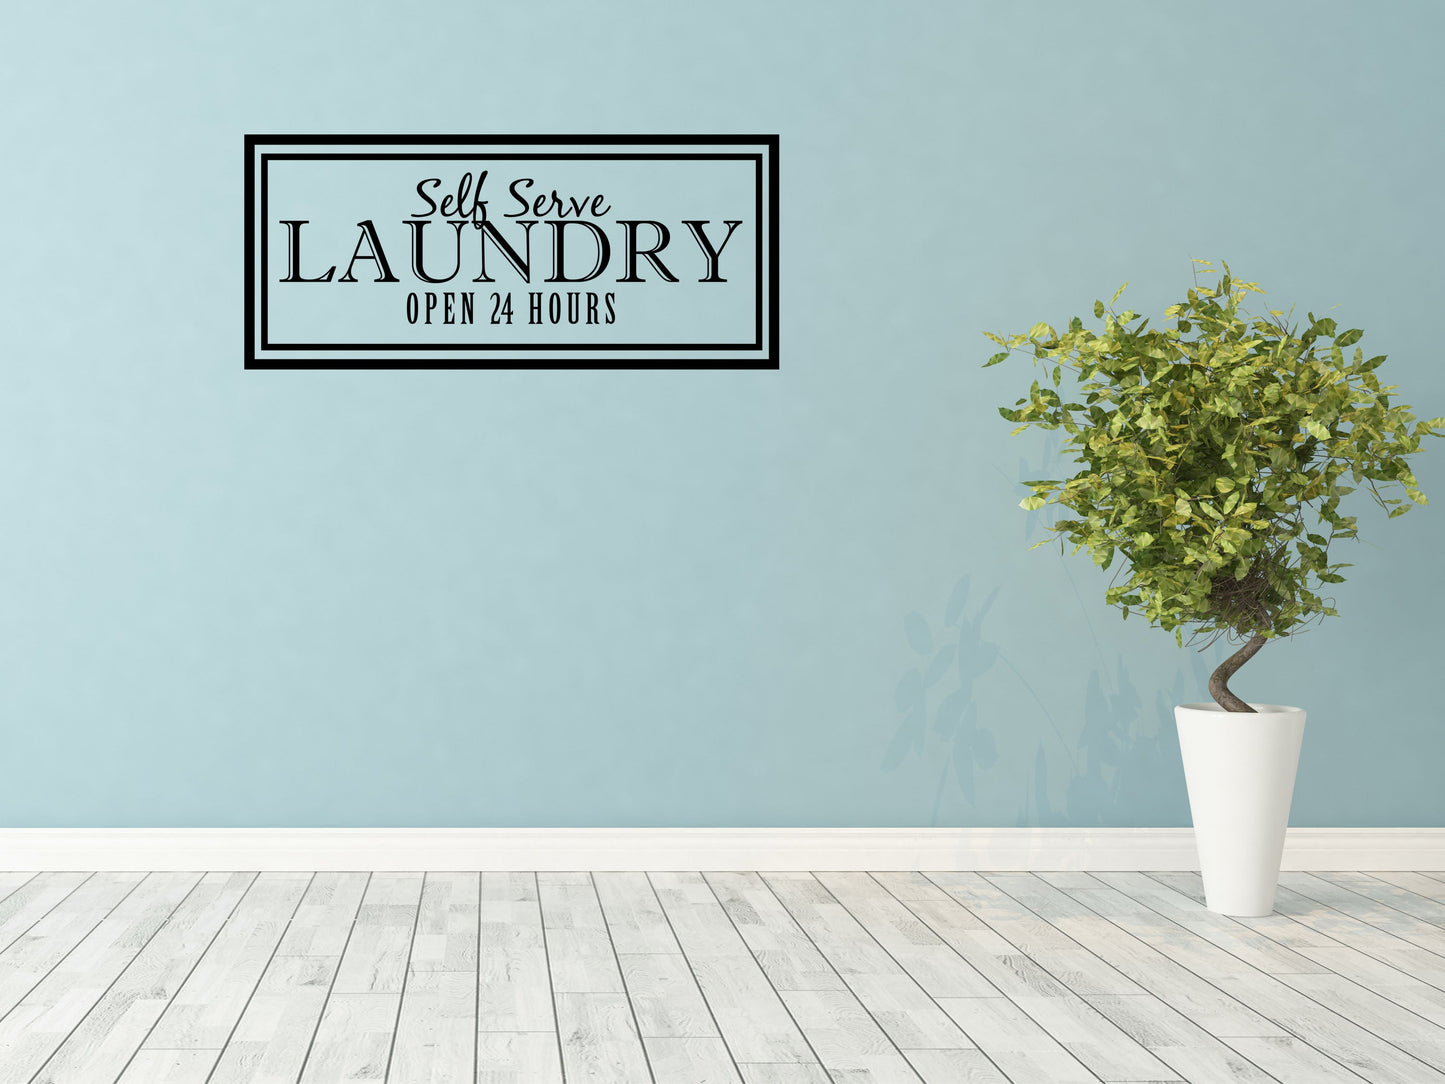 Laundry Decal Sign - Laundry Wall Sticker - Laundry Room Décor - Laundry Wall Art Décor Vinyl Wall Decal Inspirational Wall Signs 